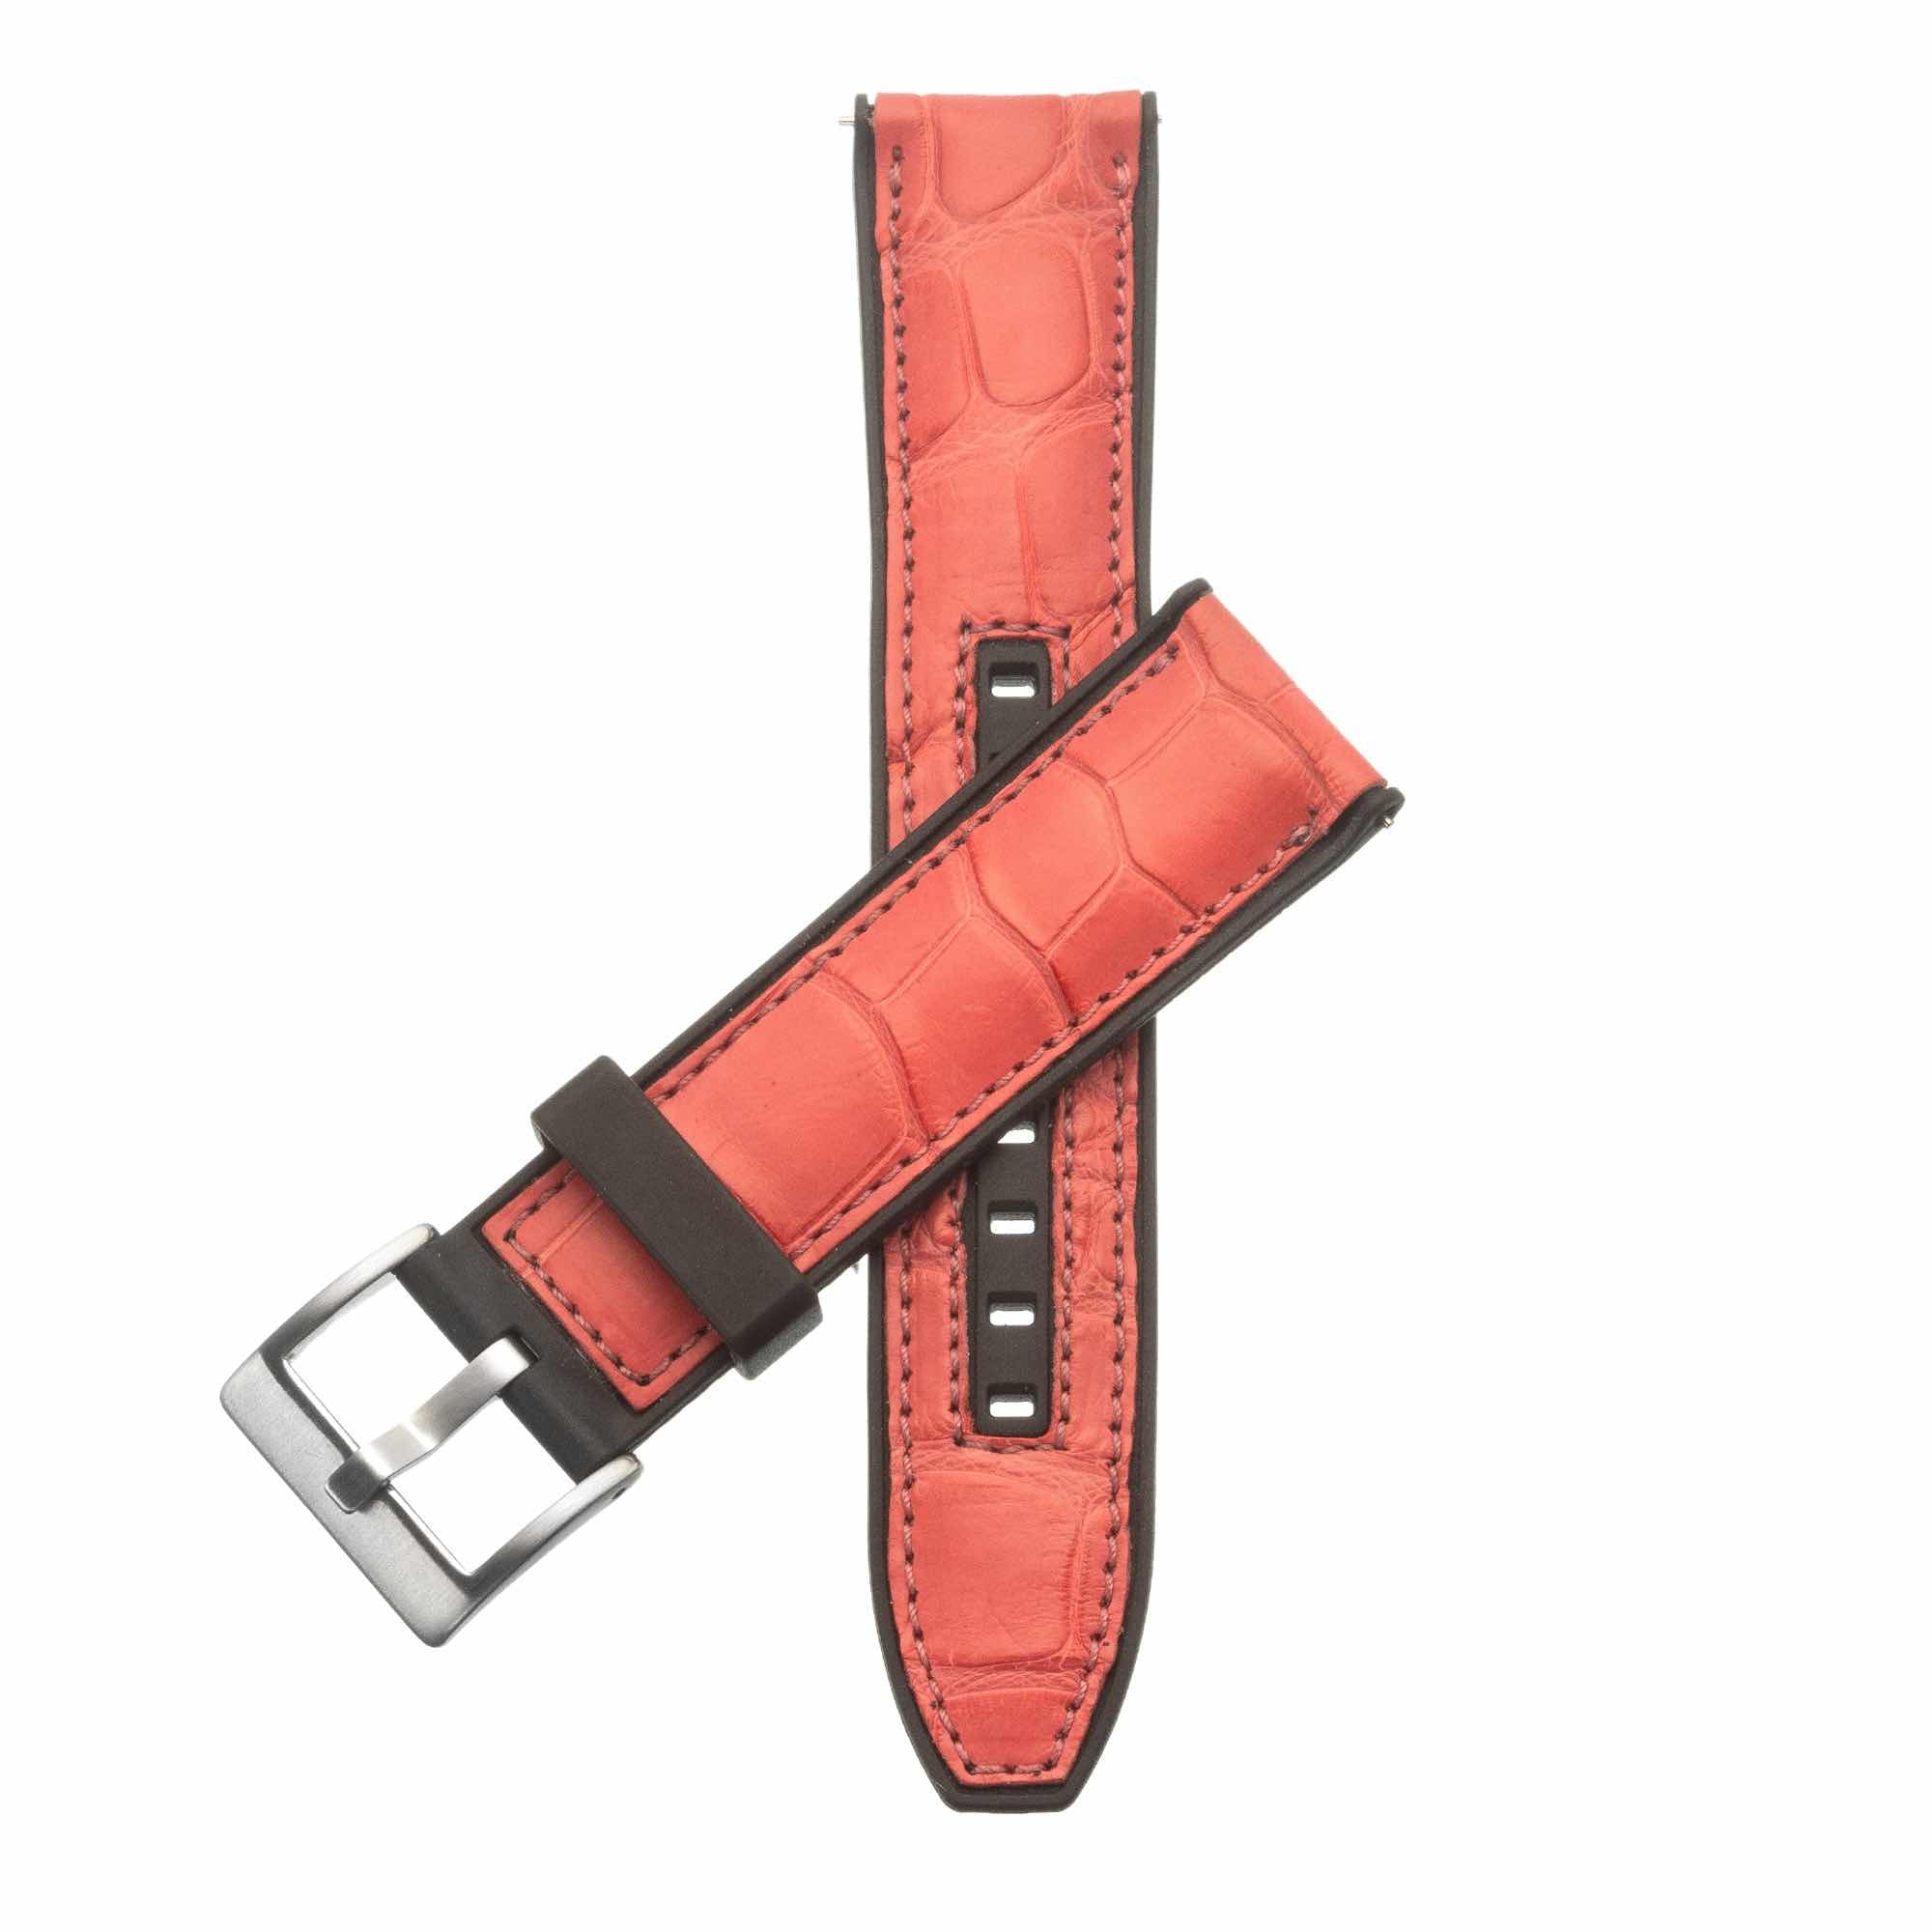 Classic watch straps - Louis Vuitton Visconti Milano watch straps  handcrafted in Italy